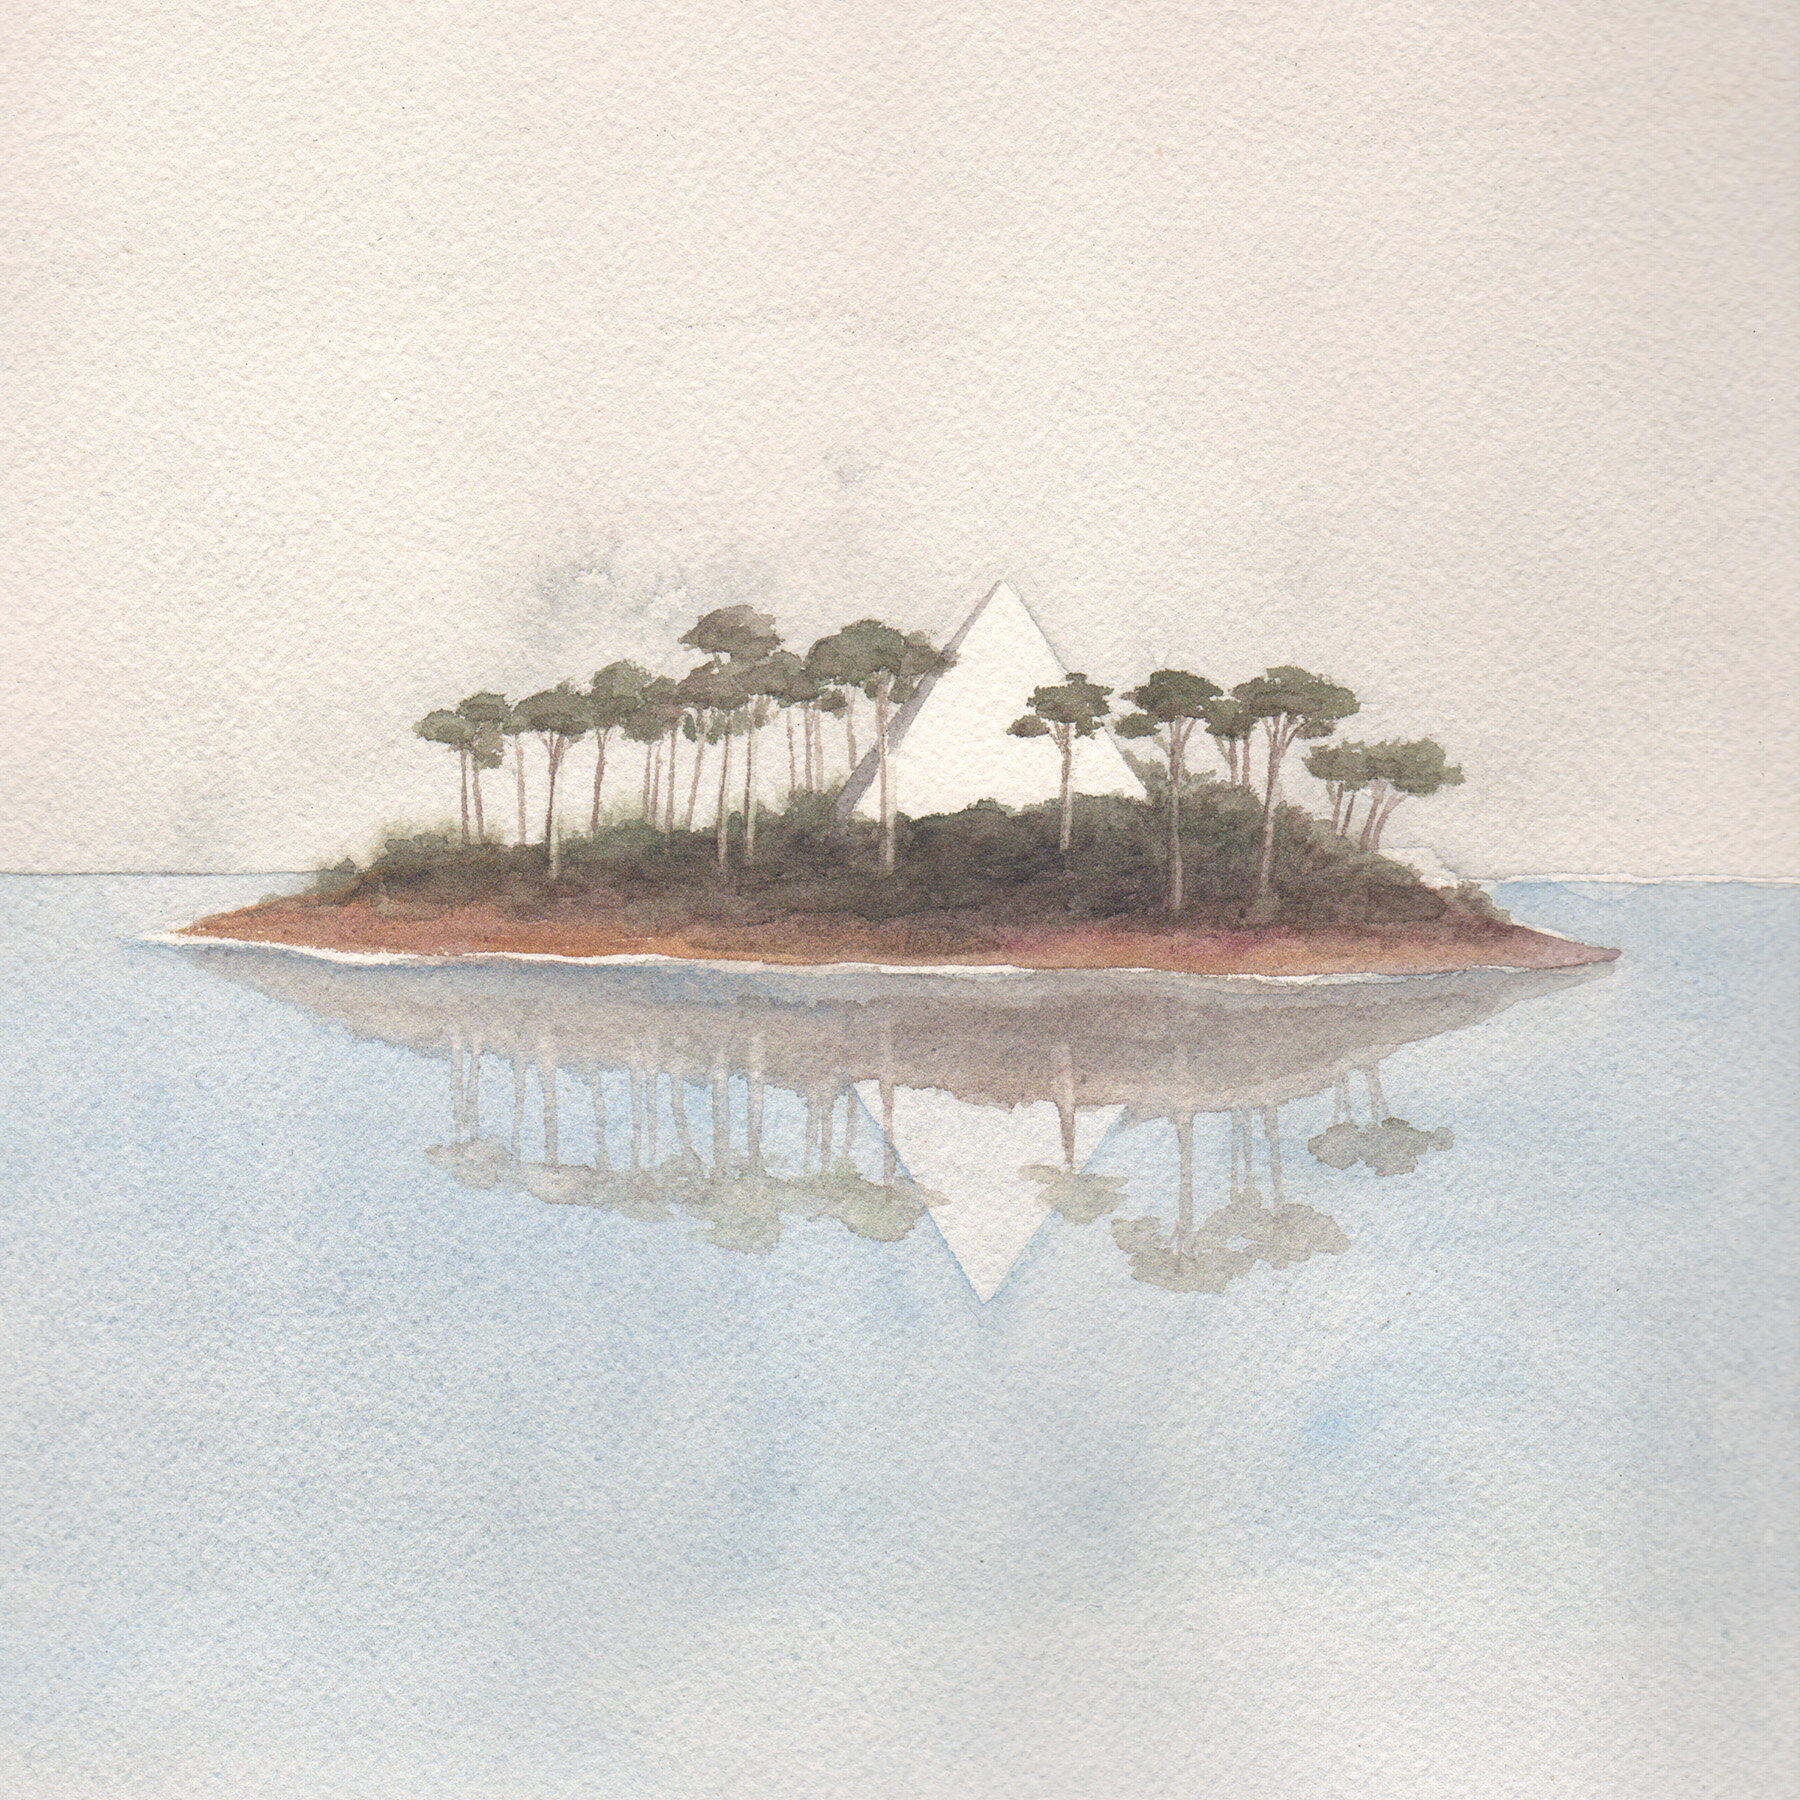   Island Temple   watercolor on paper  12” x 12”  2019  (sold) 